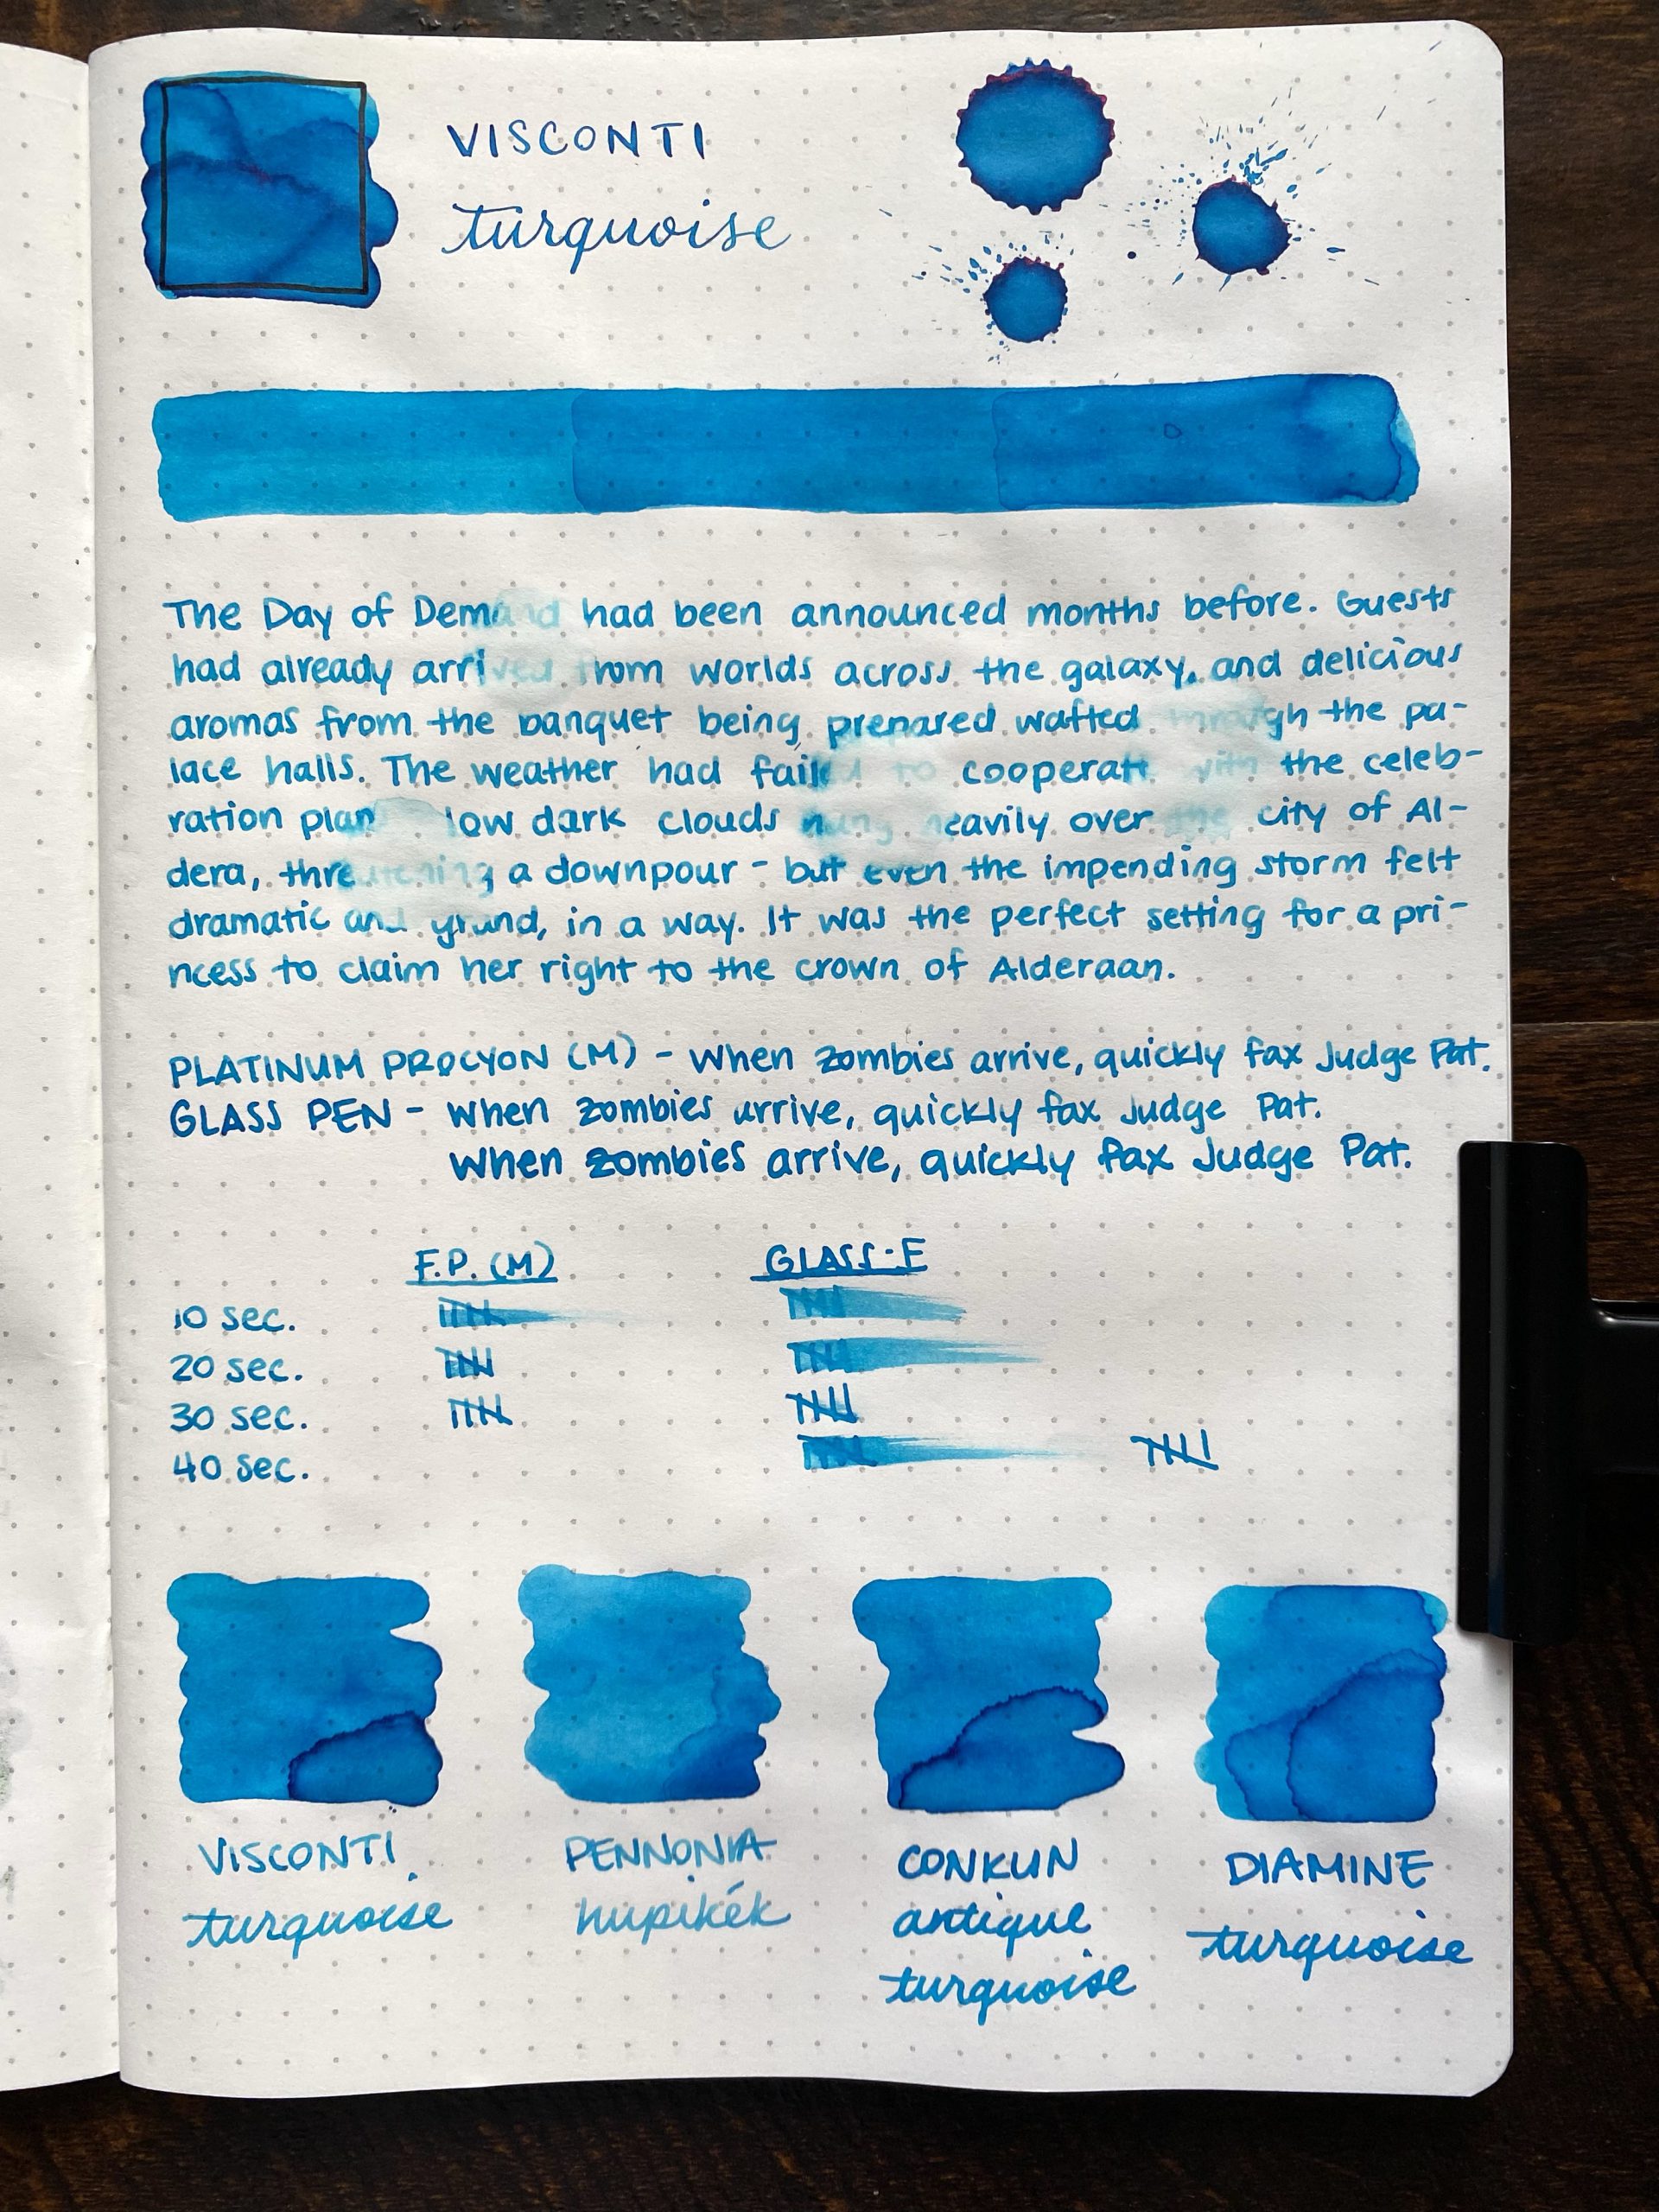 Visconti Turquoise Ink Review